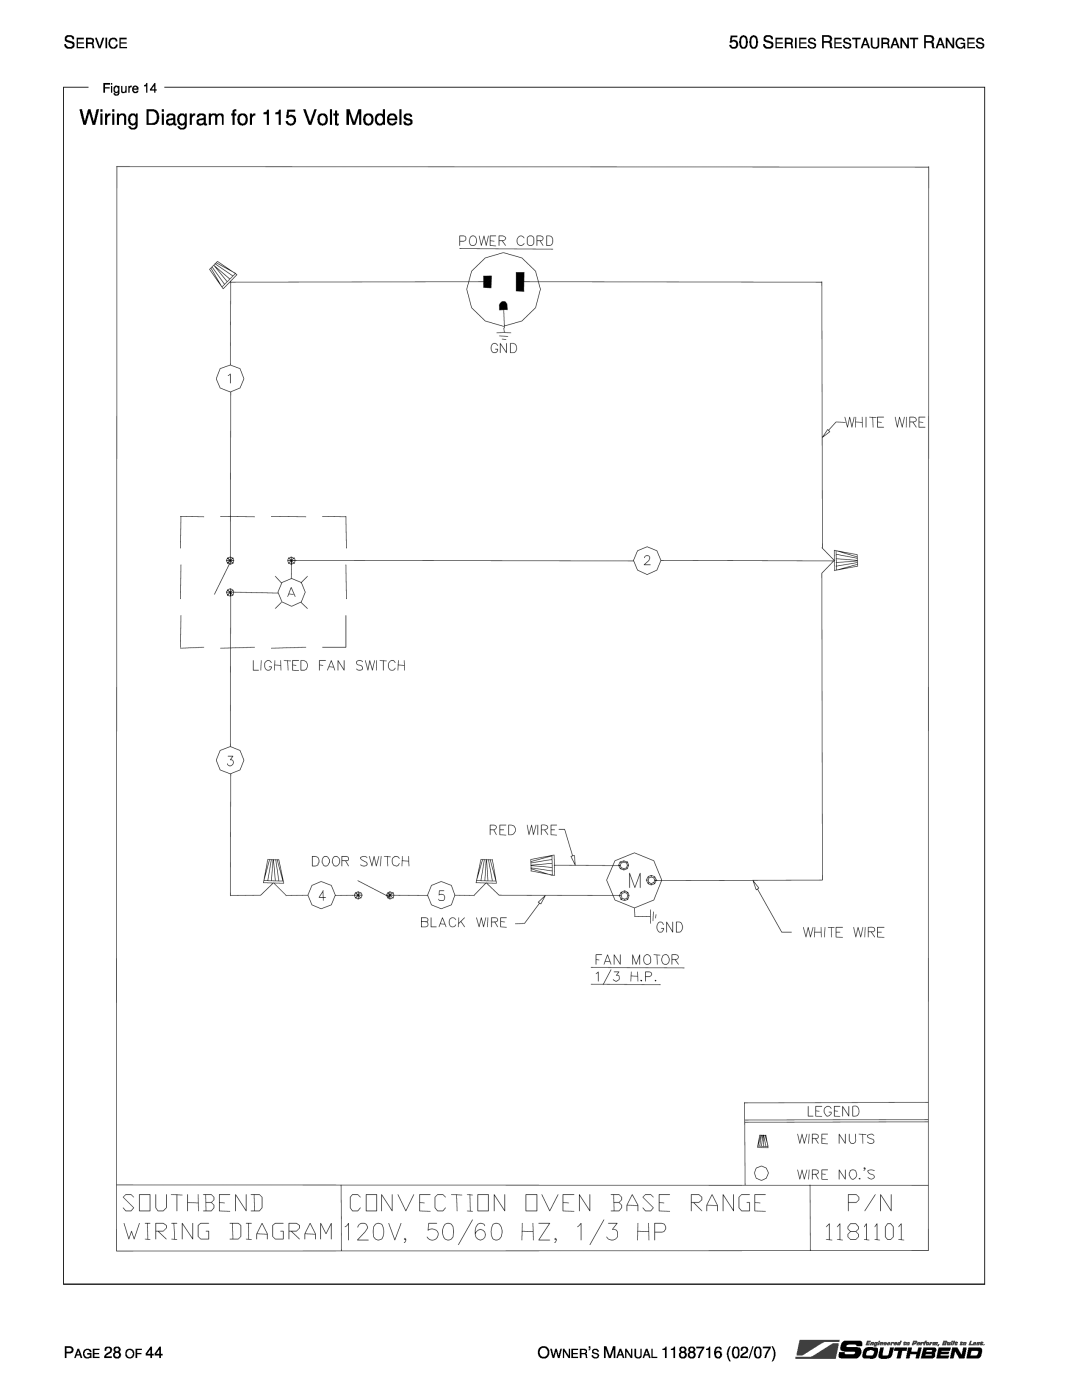 Southbend X536D, X560AA, X536A, S560DD, S536D, X560AD, S560AA, S560AD owner manual Wiring Diagram for 115 Volt Models, PAGE 28 OF 